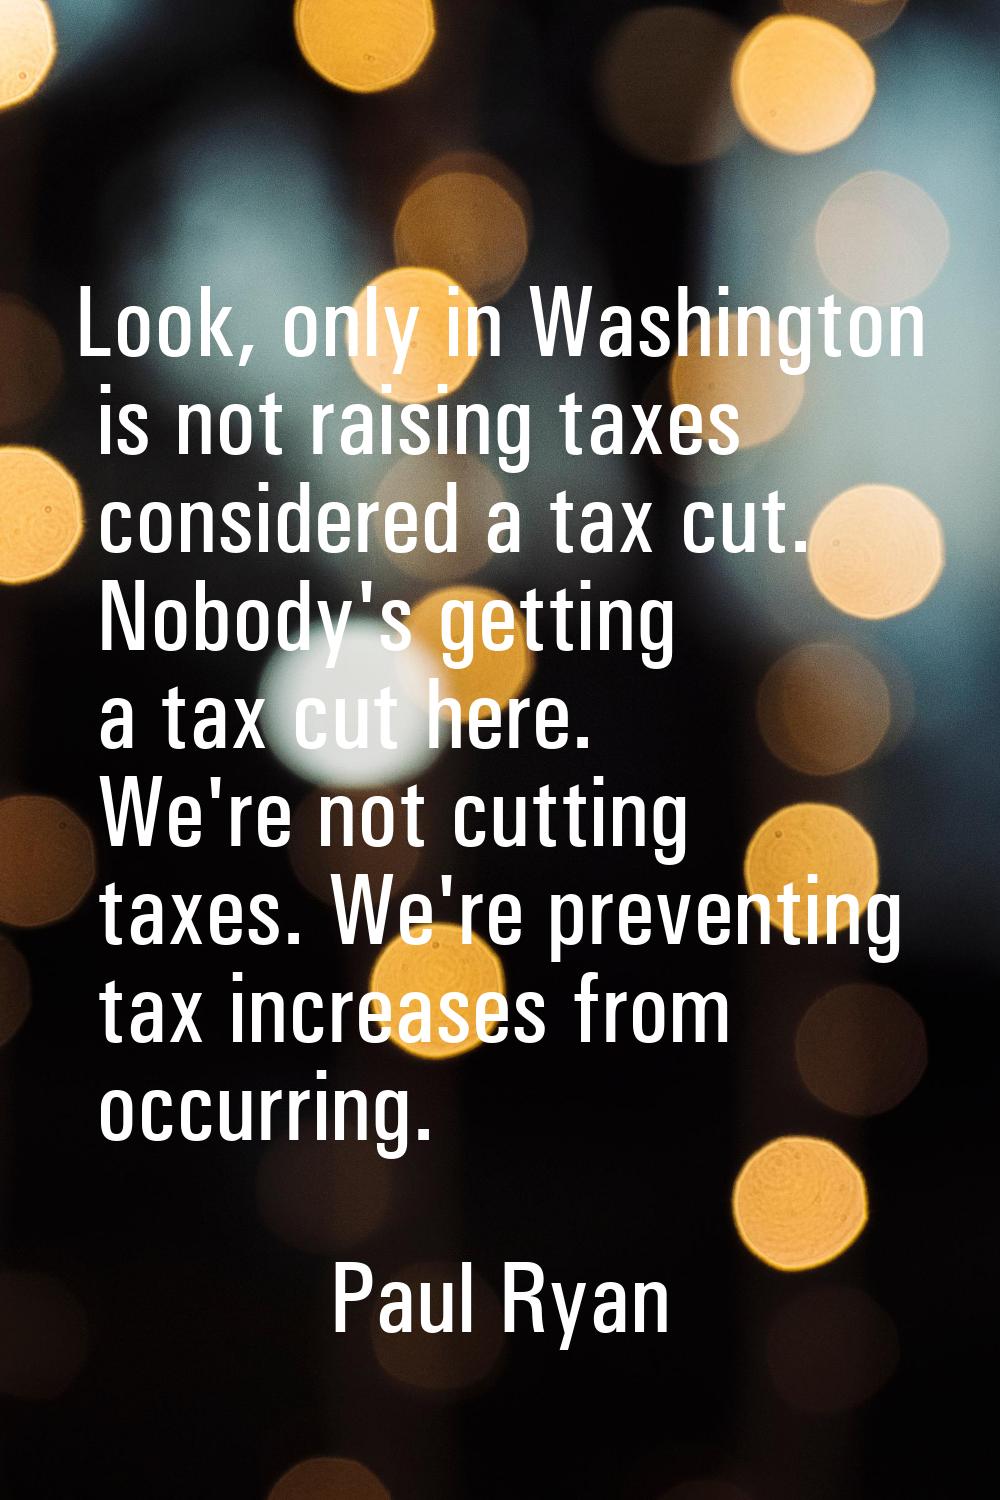 Look, only in Washington is not raising taxes considered a tax cut. Nobody's getting a tax cut here